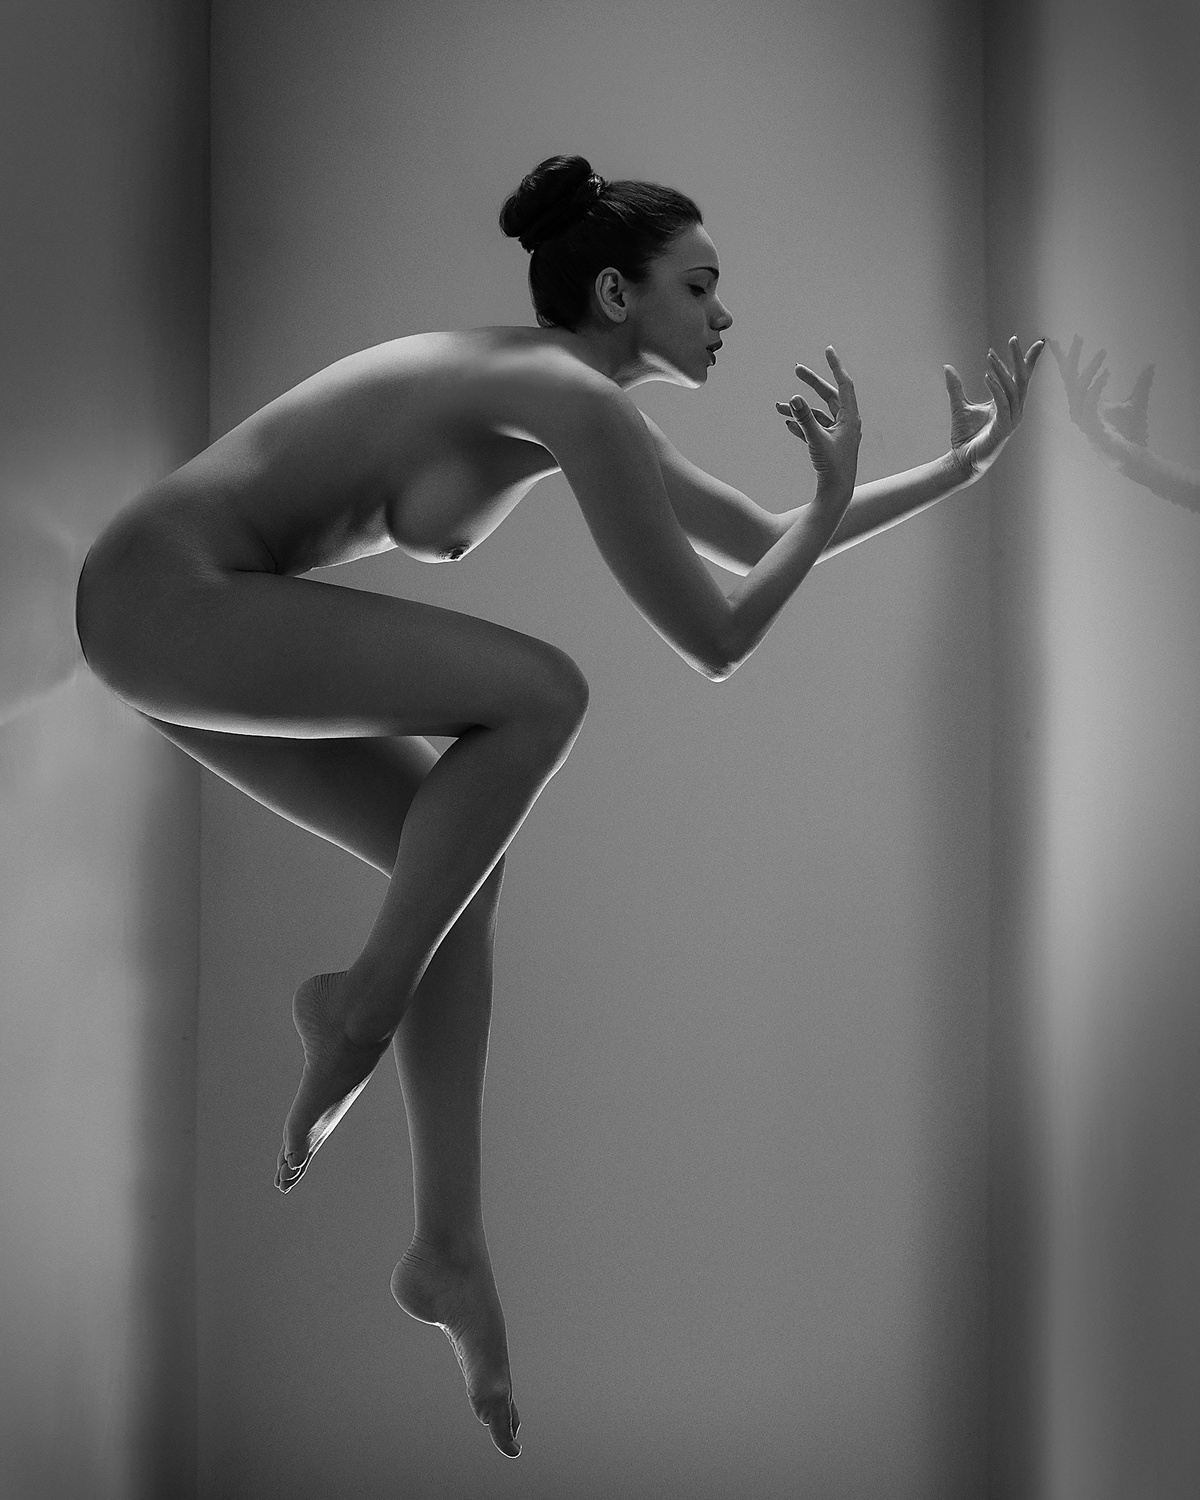 The indian origin nude art model who's challenging how we view the female body